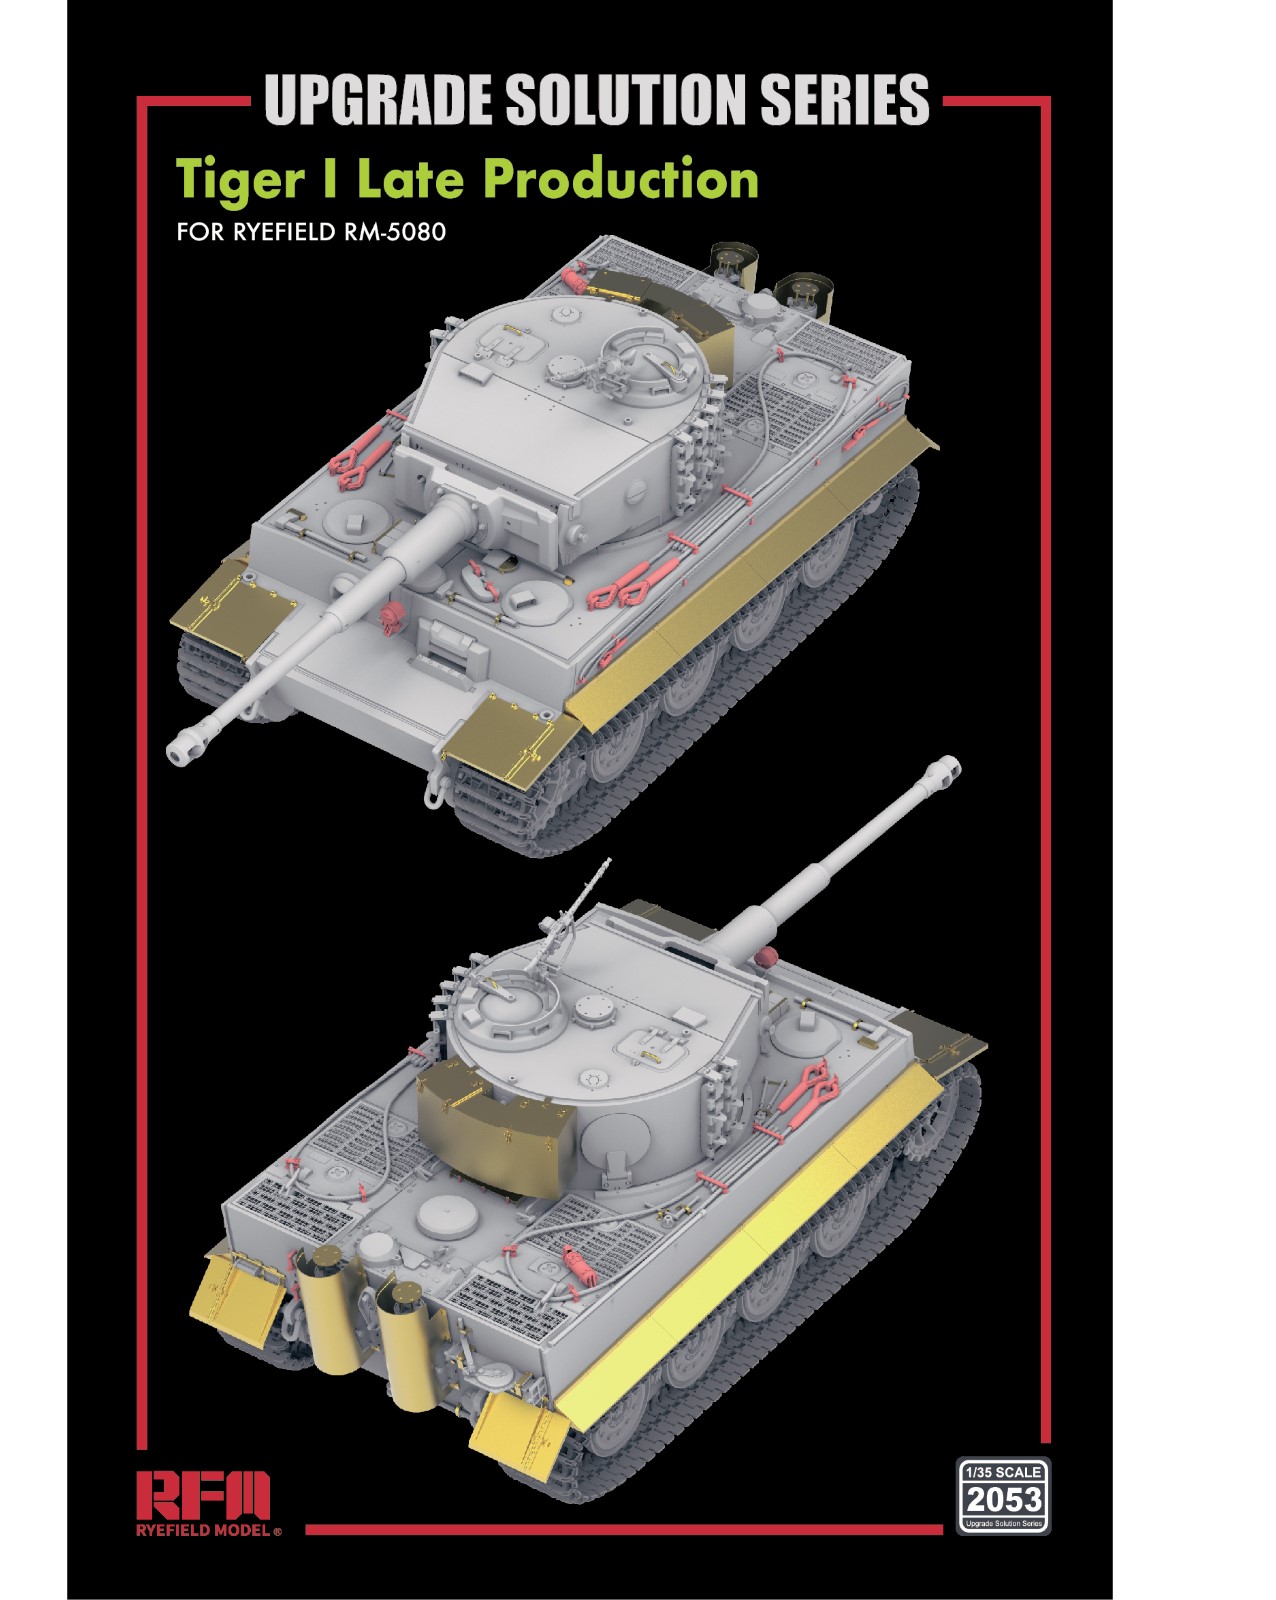 Tiger I Late Production UPGRADE SOLUTION SERIES - RM-2053